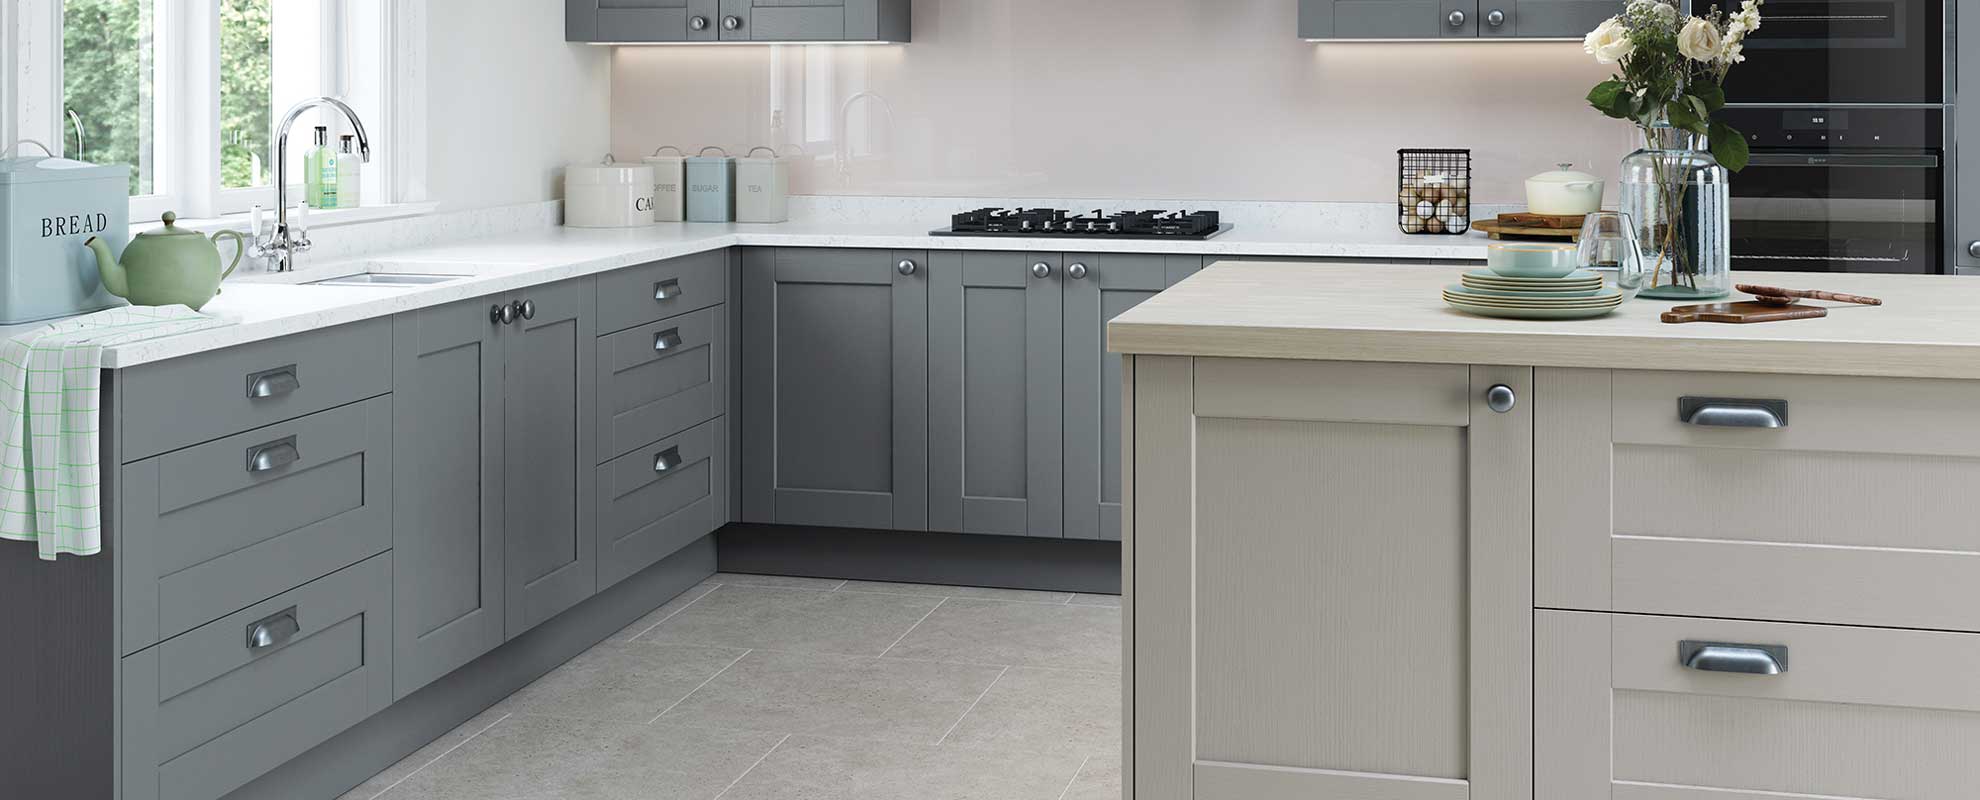 Kensington kitchen shown in Light Grey and Dust Grey